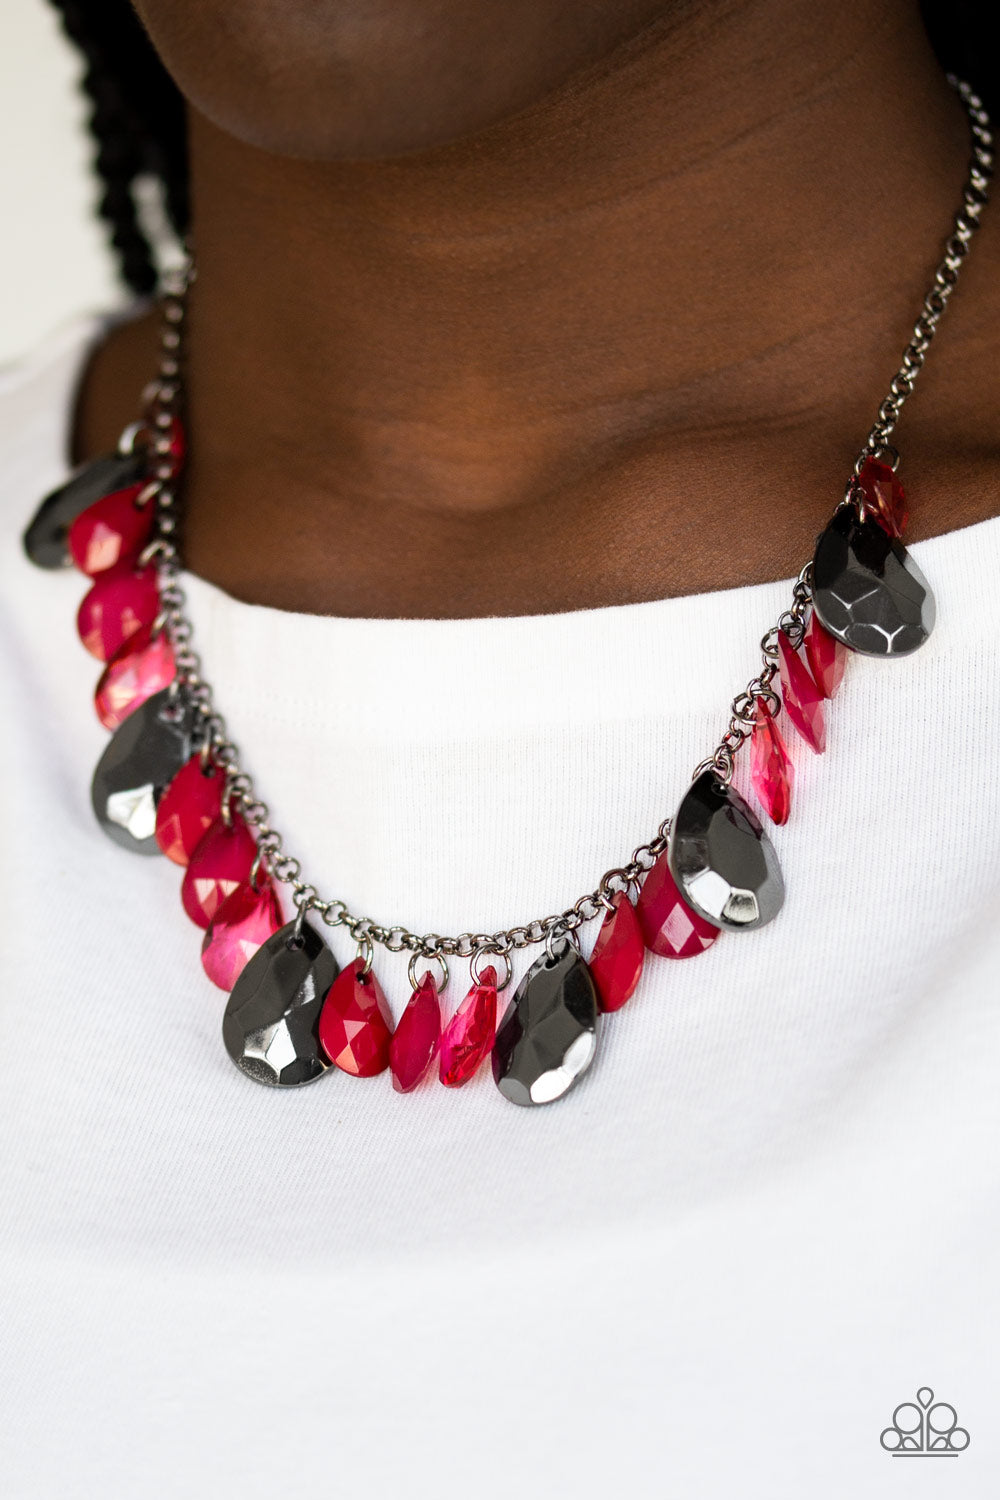 Paparazzi Hurricane Season - Red Necklace - A Finishing Touch 